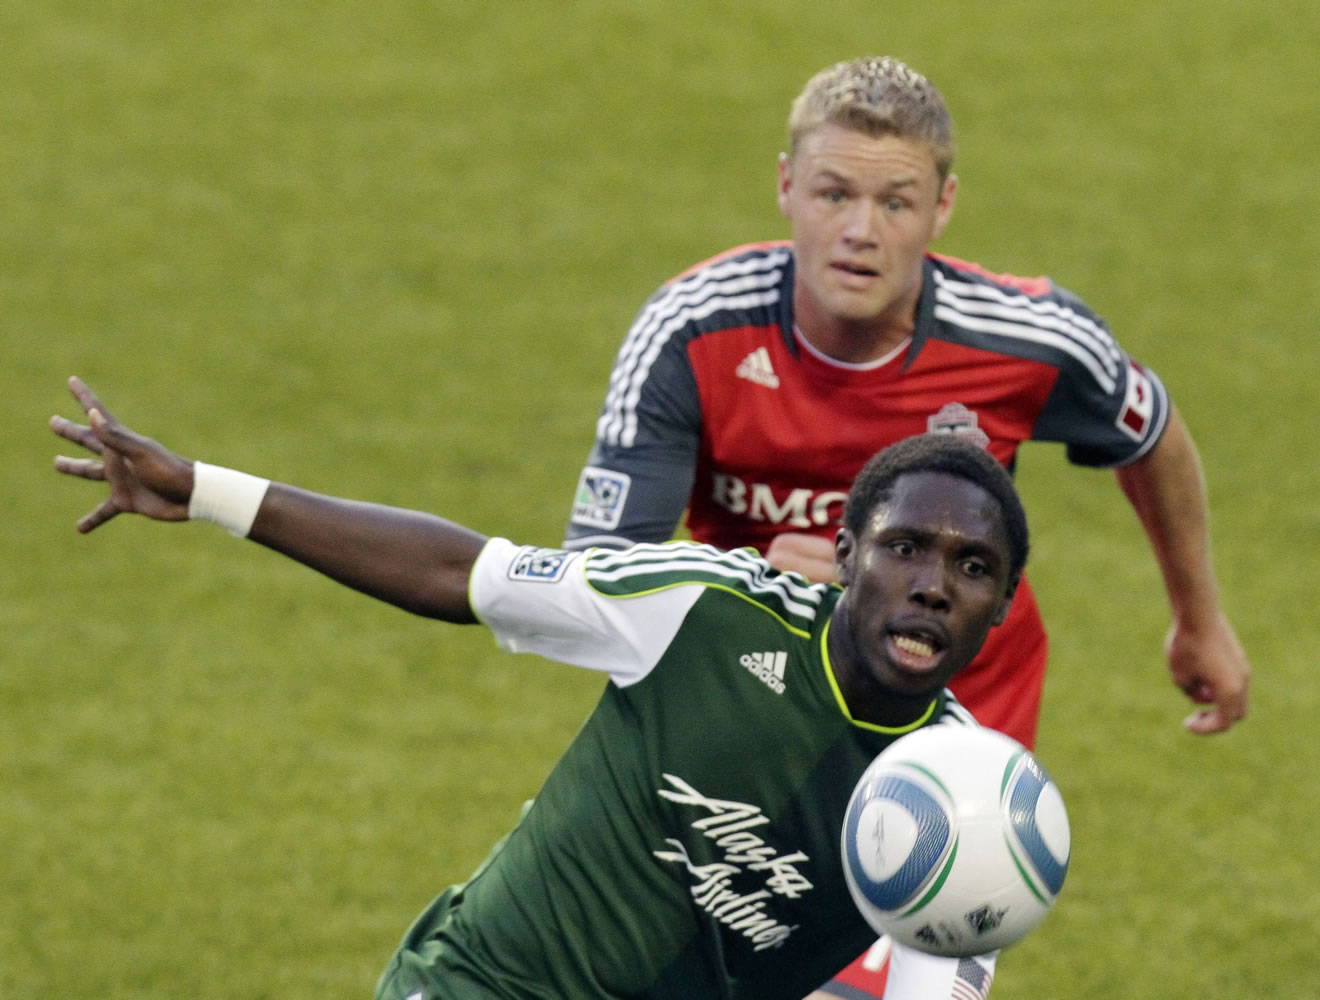 Portland Timbers midfielder Kalif Alhassan, front, chases the ball as Toronto FC's Nick Soolsma defends during the first half of Saturday's MLS match.